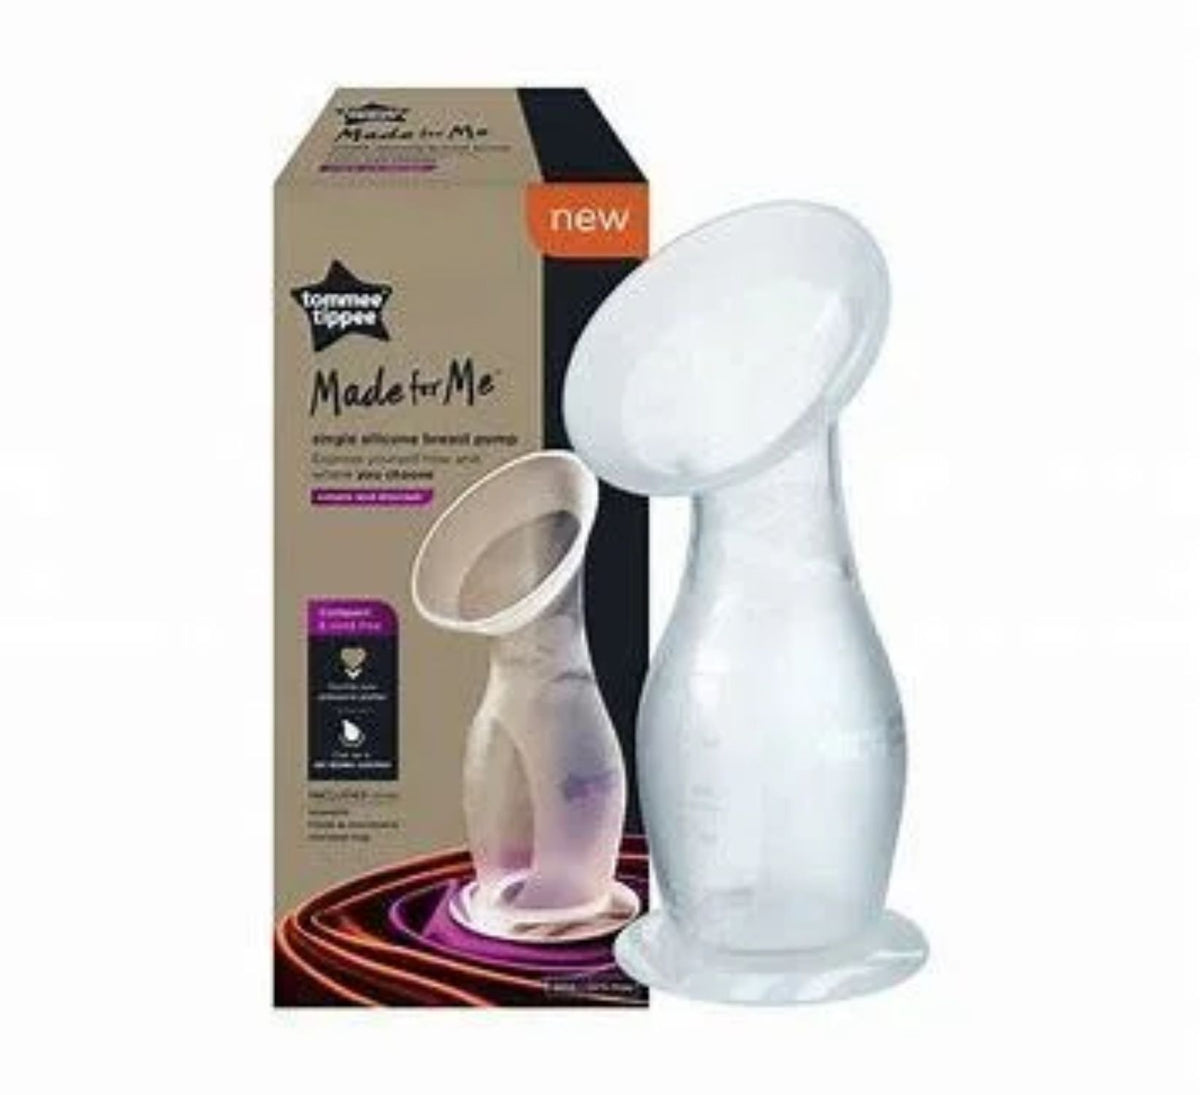 https://cdn.shopify.com/s/files/1/0711/5941/5102/products/TommeeTippeeSiliconeBreastPump_1200x.jpg?v=1680680998